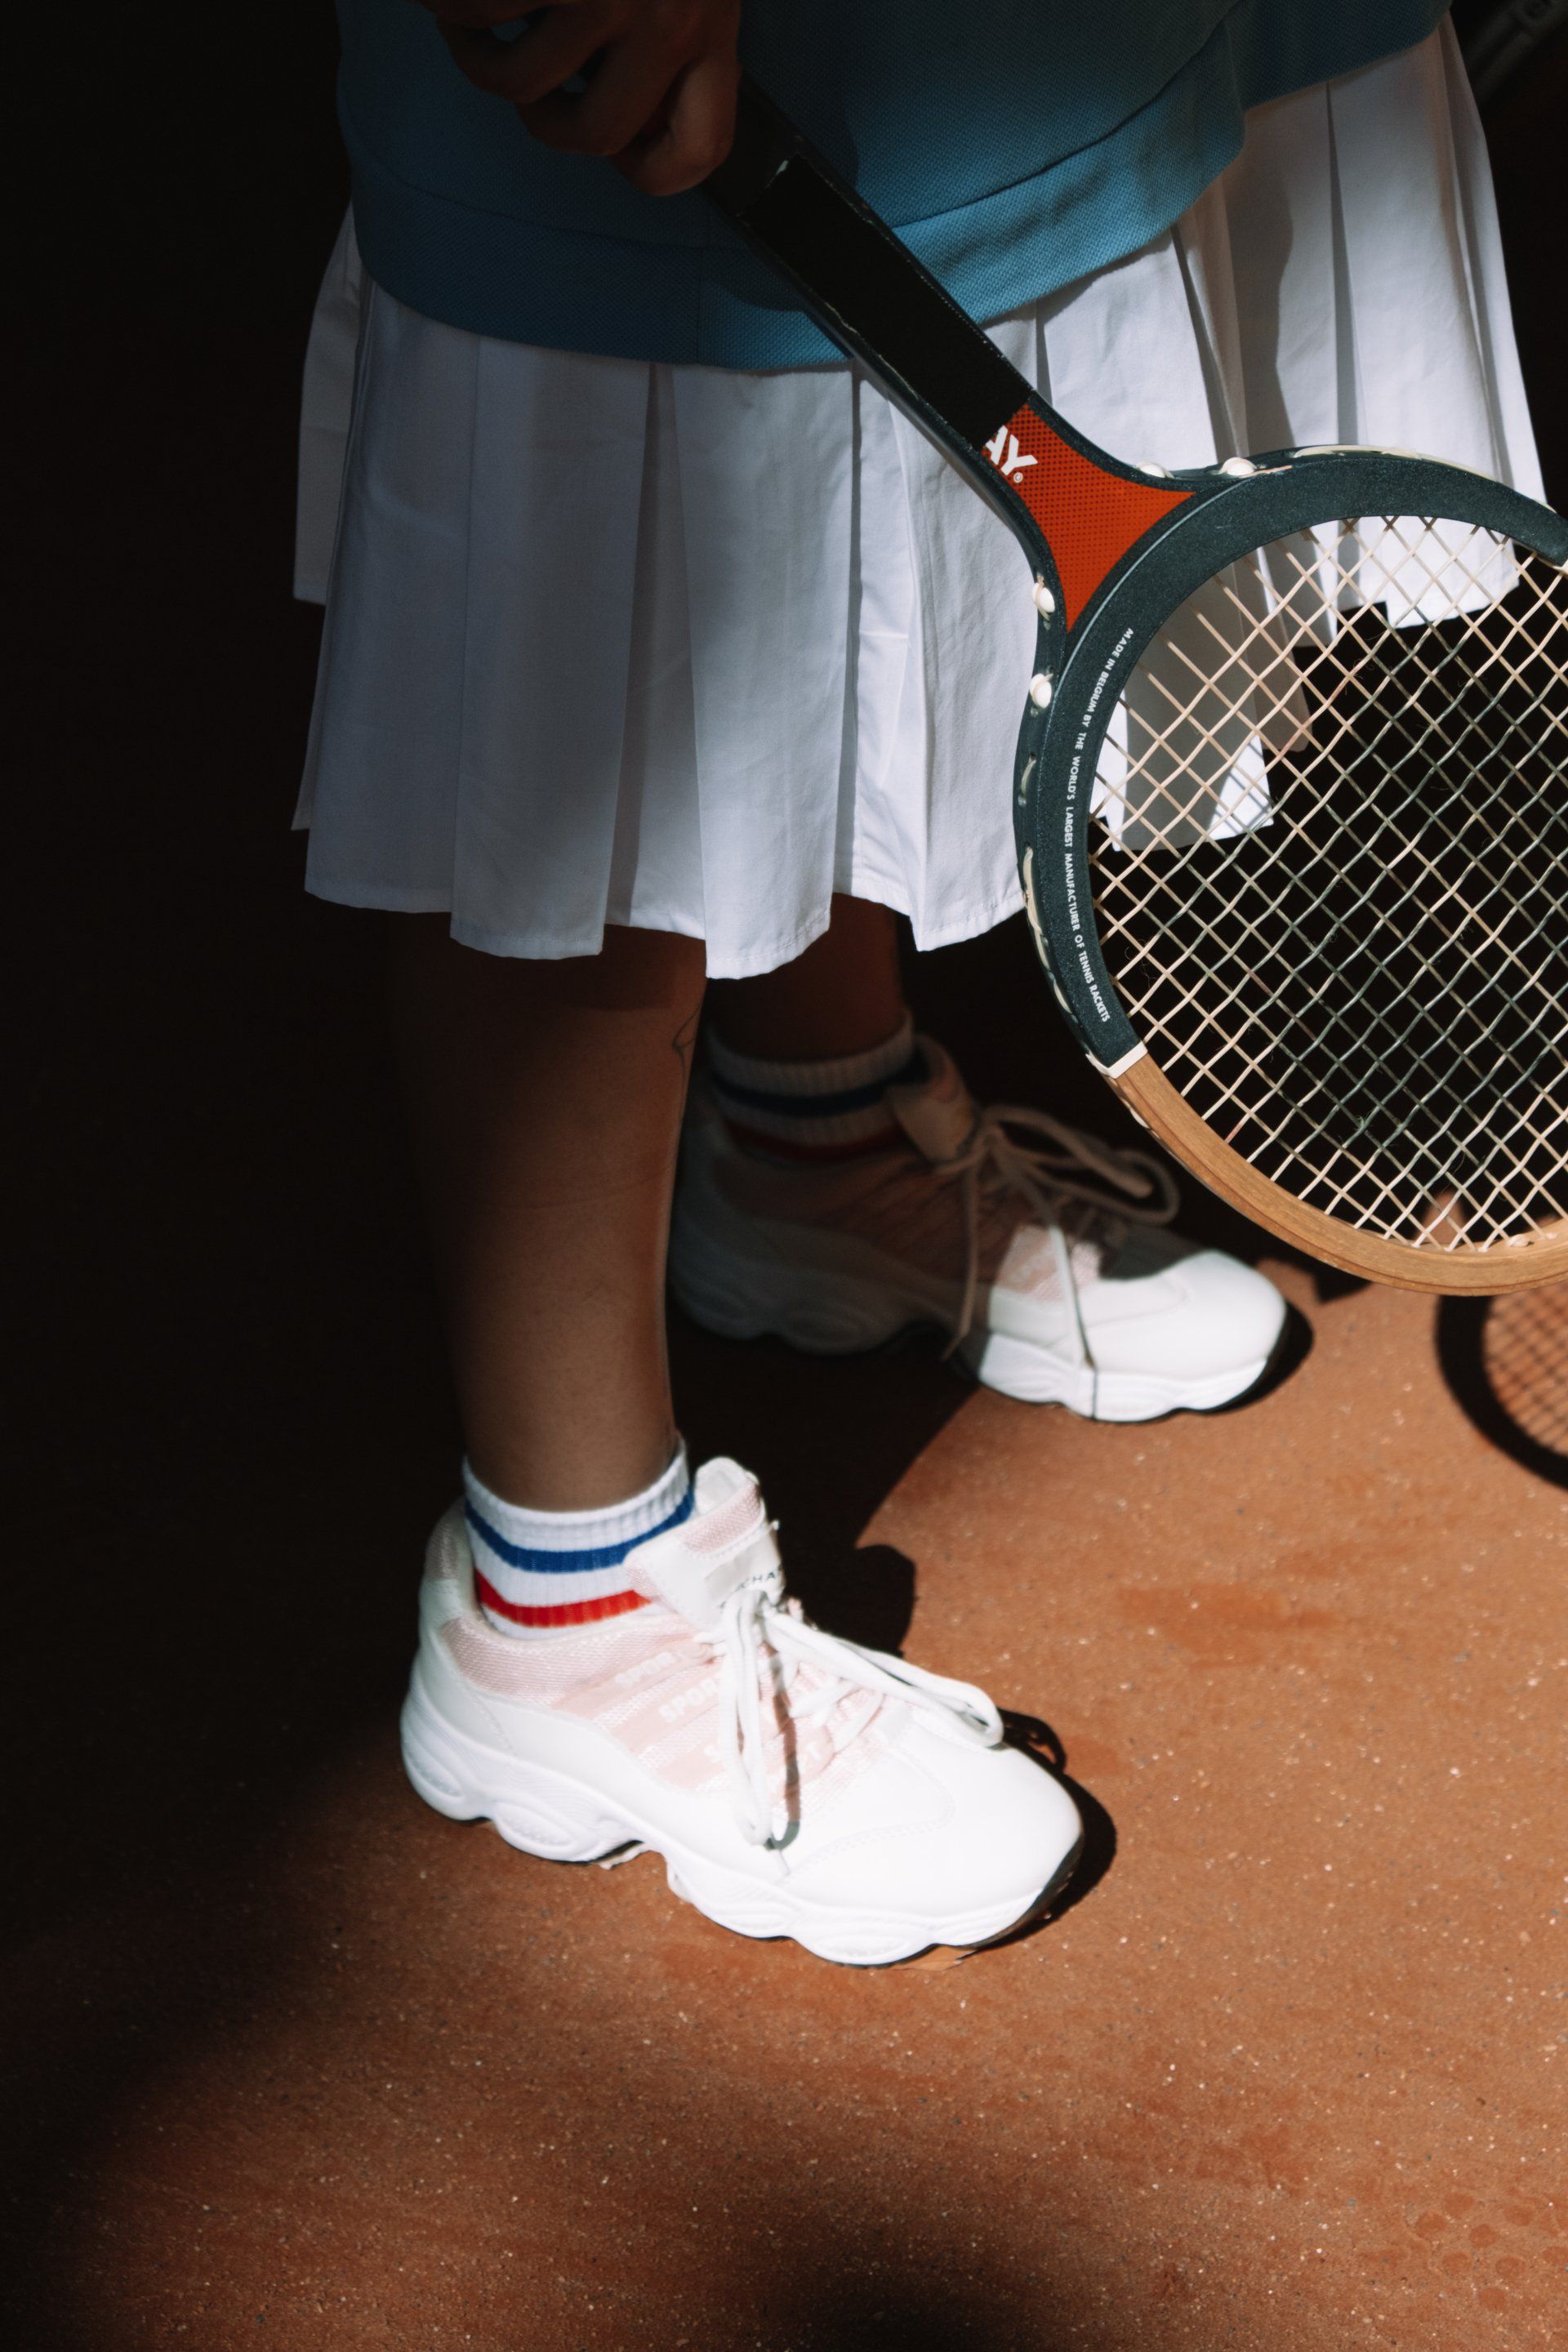 Young woman's feet showing that she's holding a tennis racket